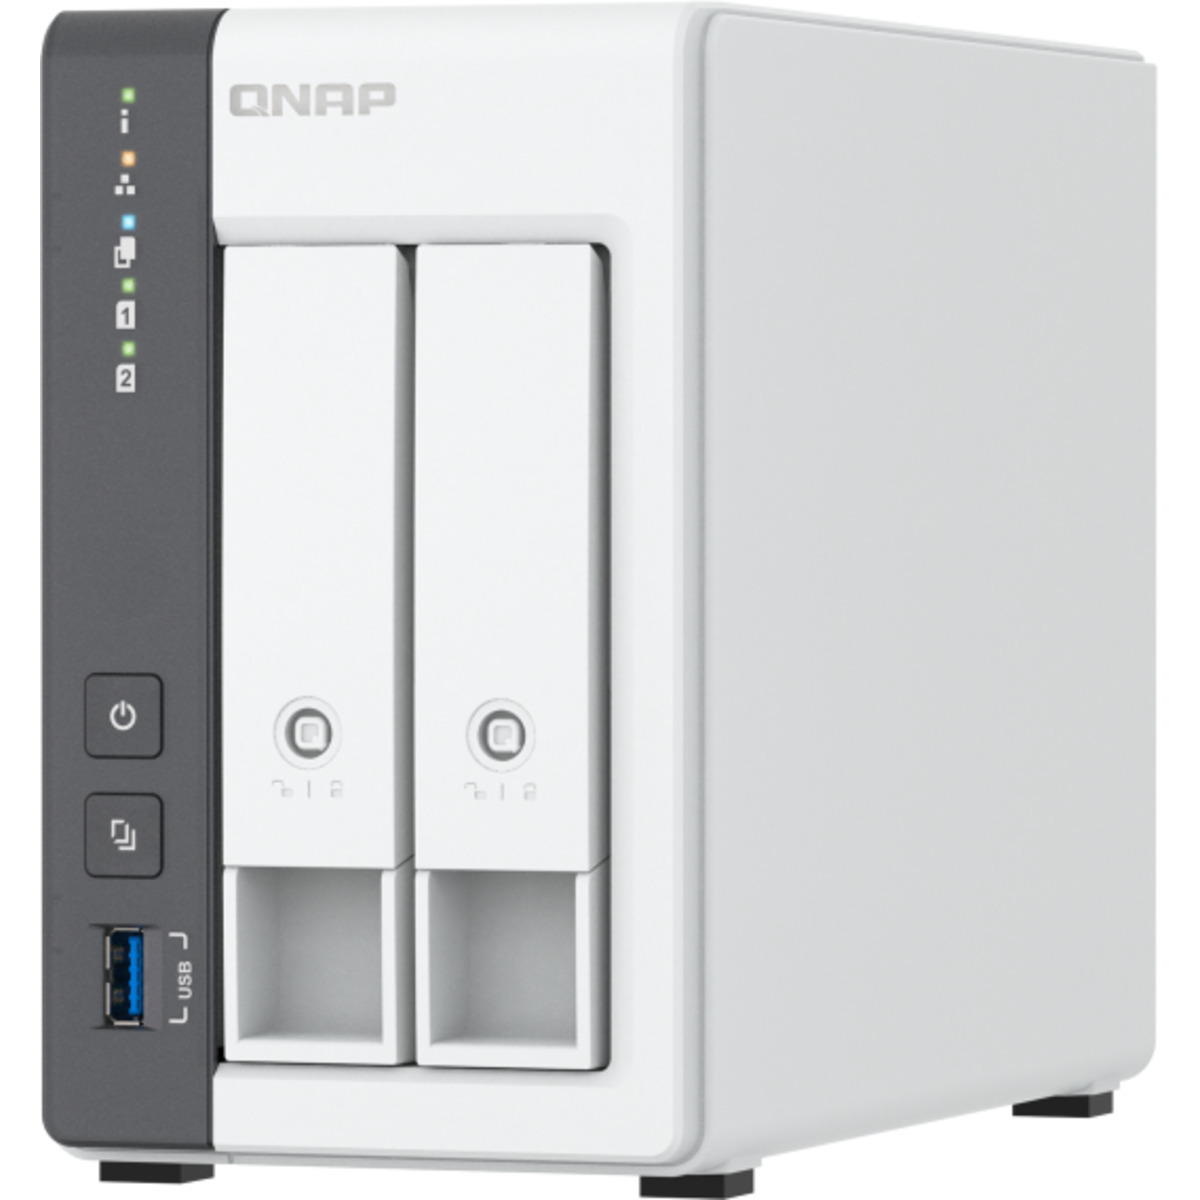 QNAP TS-216G 8tb 2-Bay Desktop Personal / Basic Home / Small Office NAS - Network Attached Storage Device 2x4tb Seagate BarraCuda ST4000DM004 3.5 7200rpm SATA 6Gb/s HDD CONSUMER Class Drives Installed - Burn-In Tested TS-216G